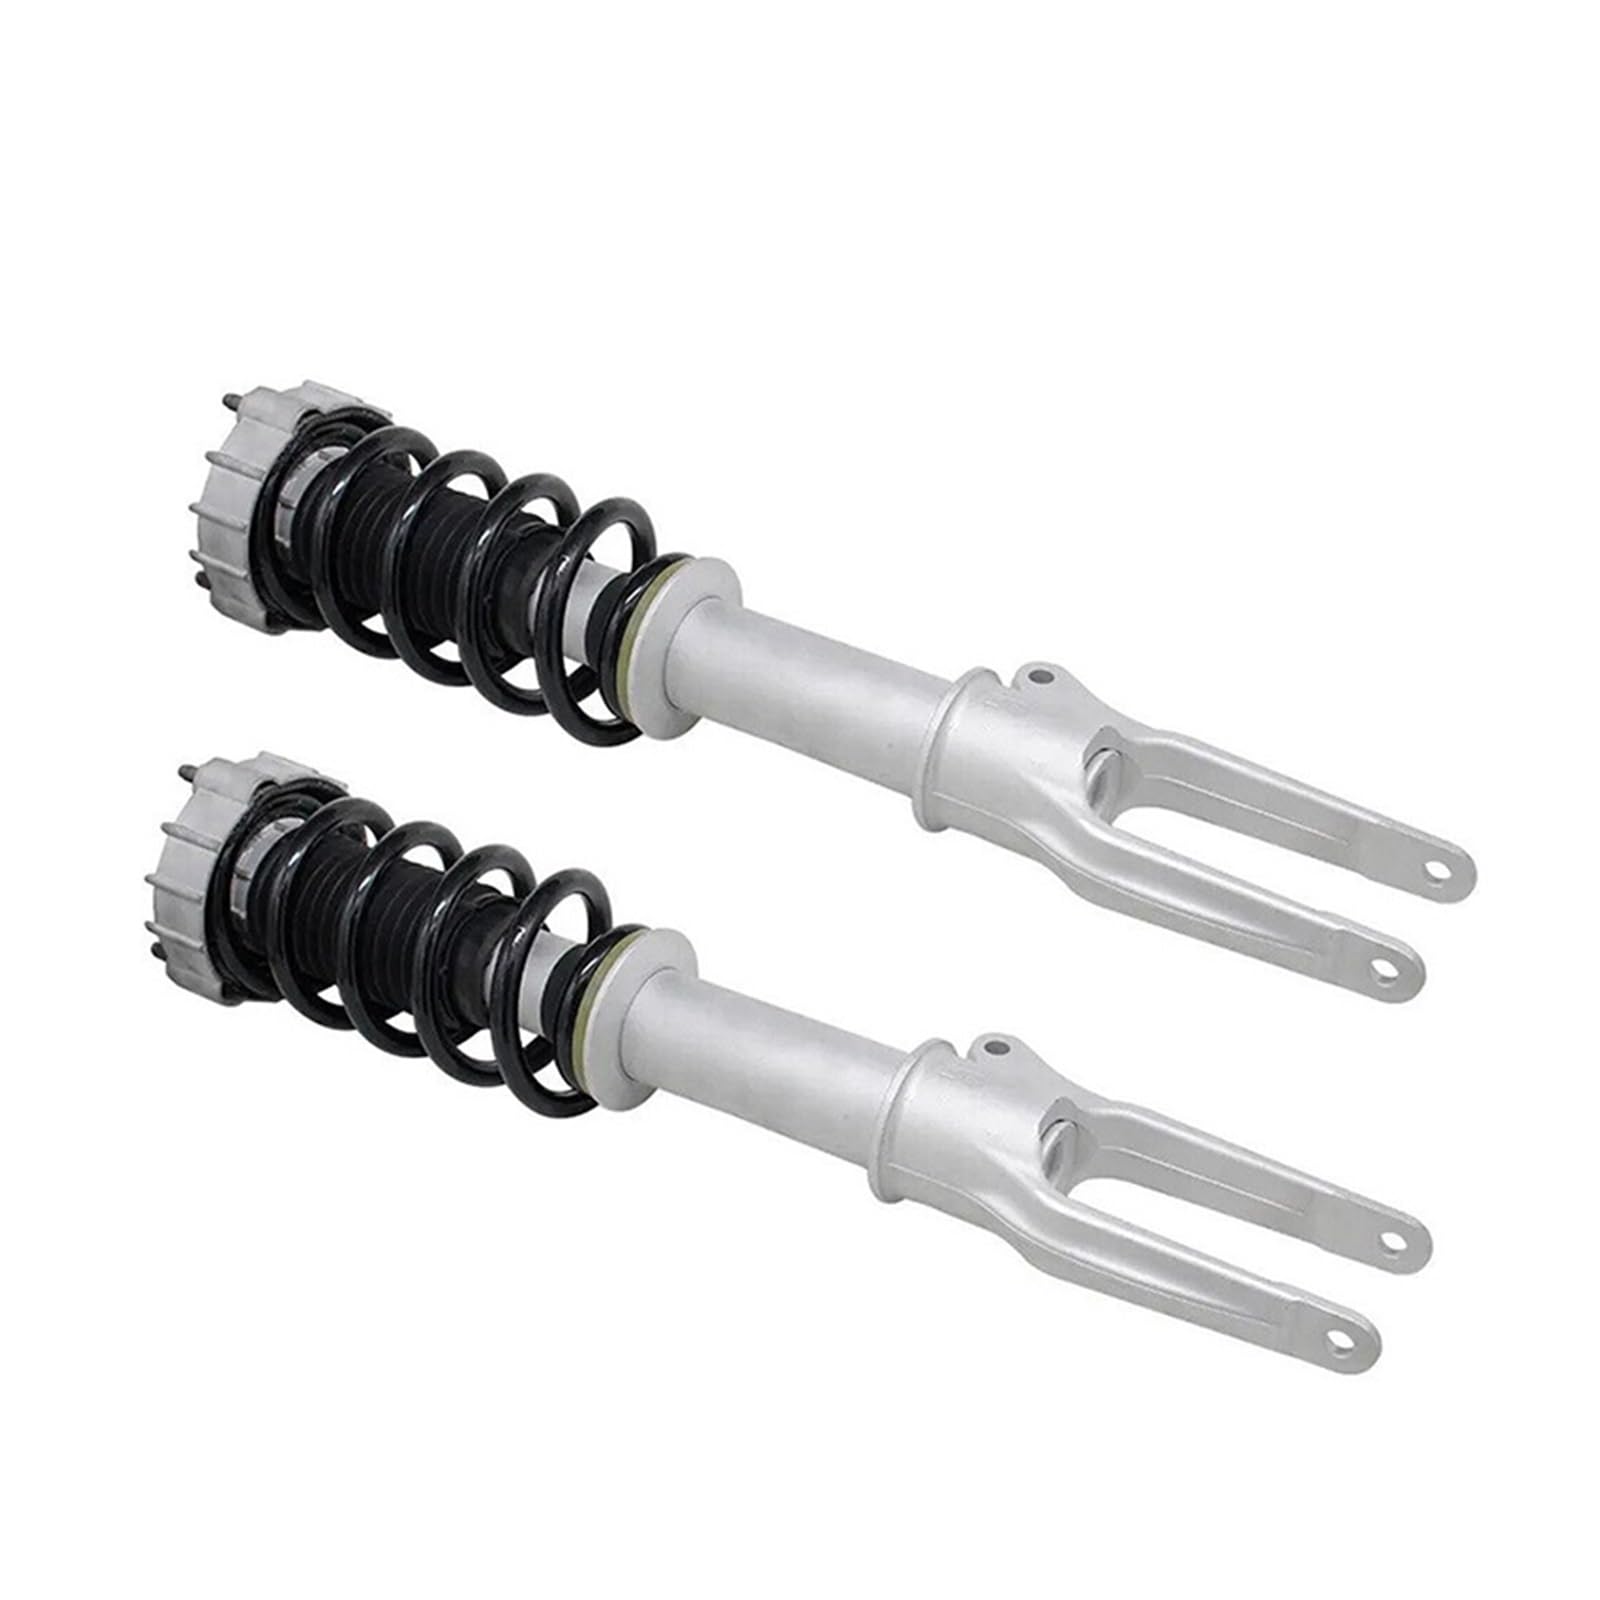 Pair Front Left Right Air Suspension Spring Shock Absorber Strut Assembly 2010-2016 W/EDC Compatible With Panamera 970 97034304505